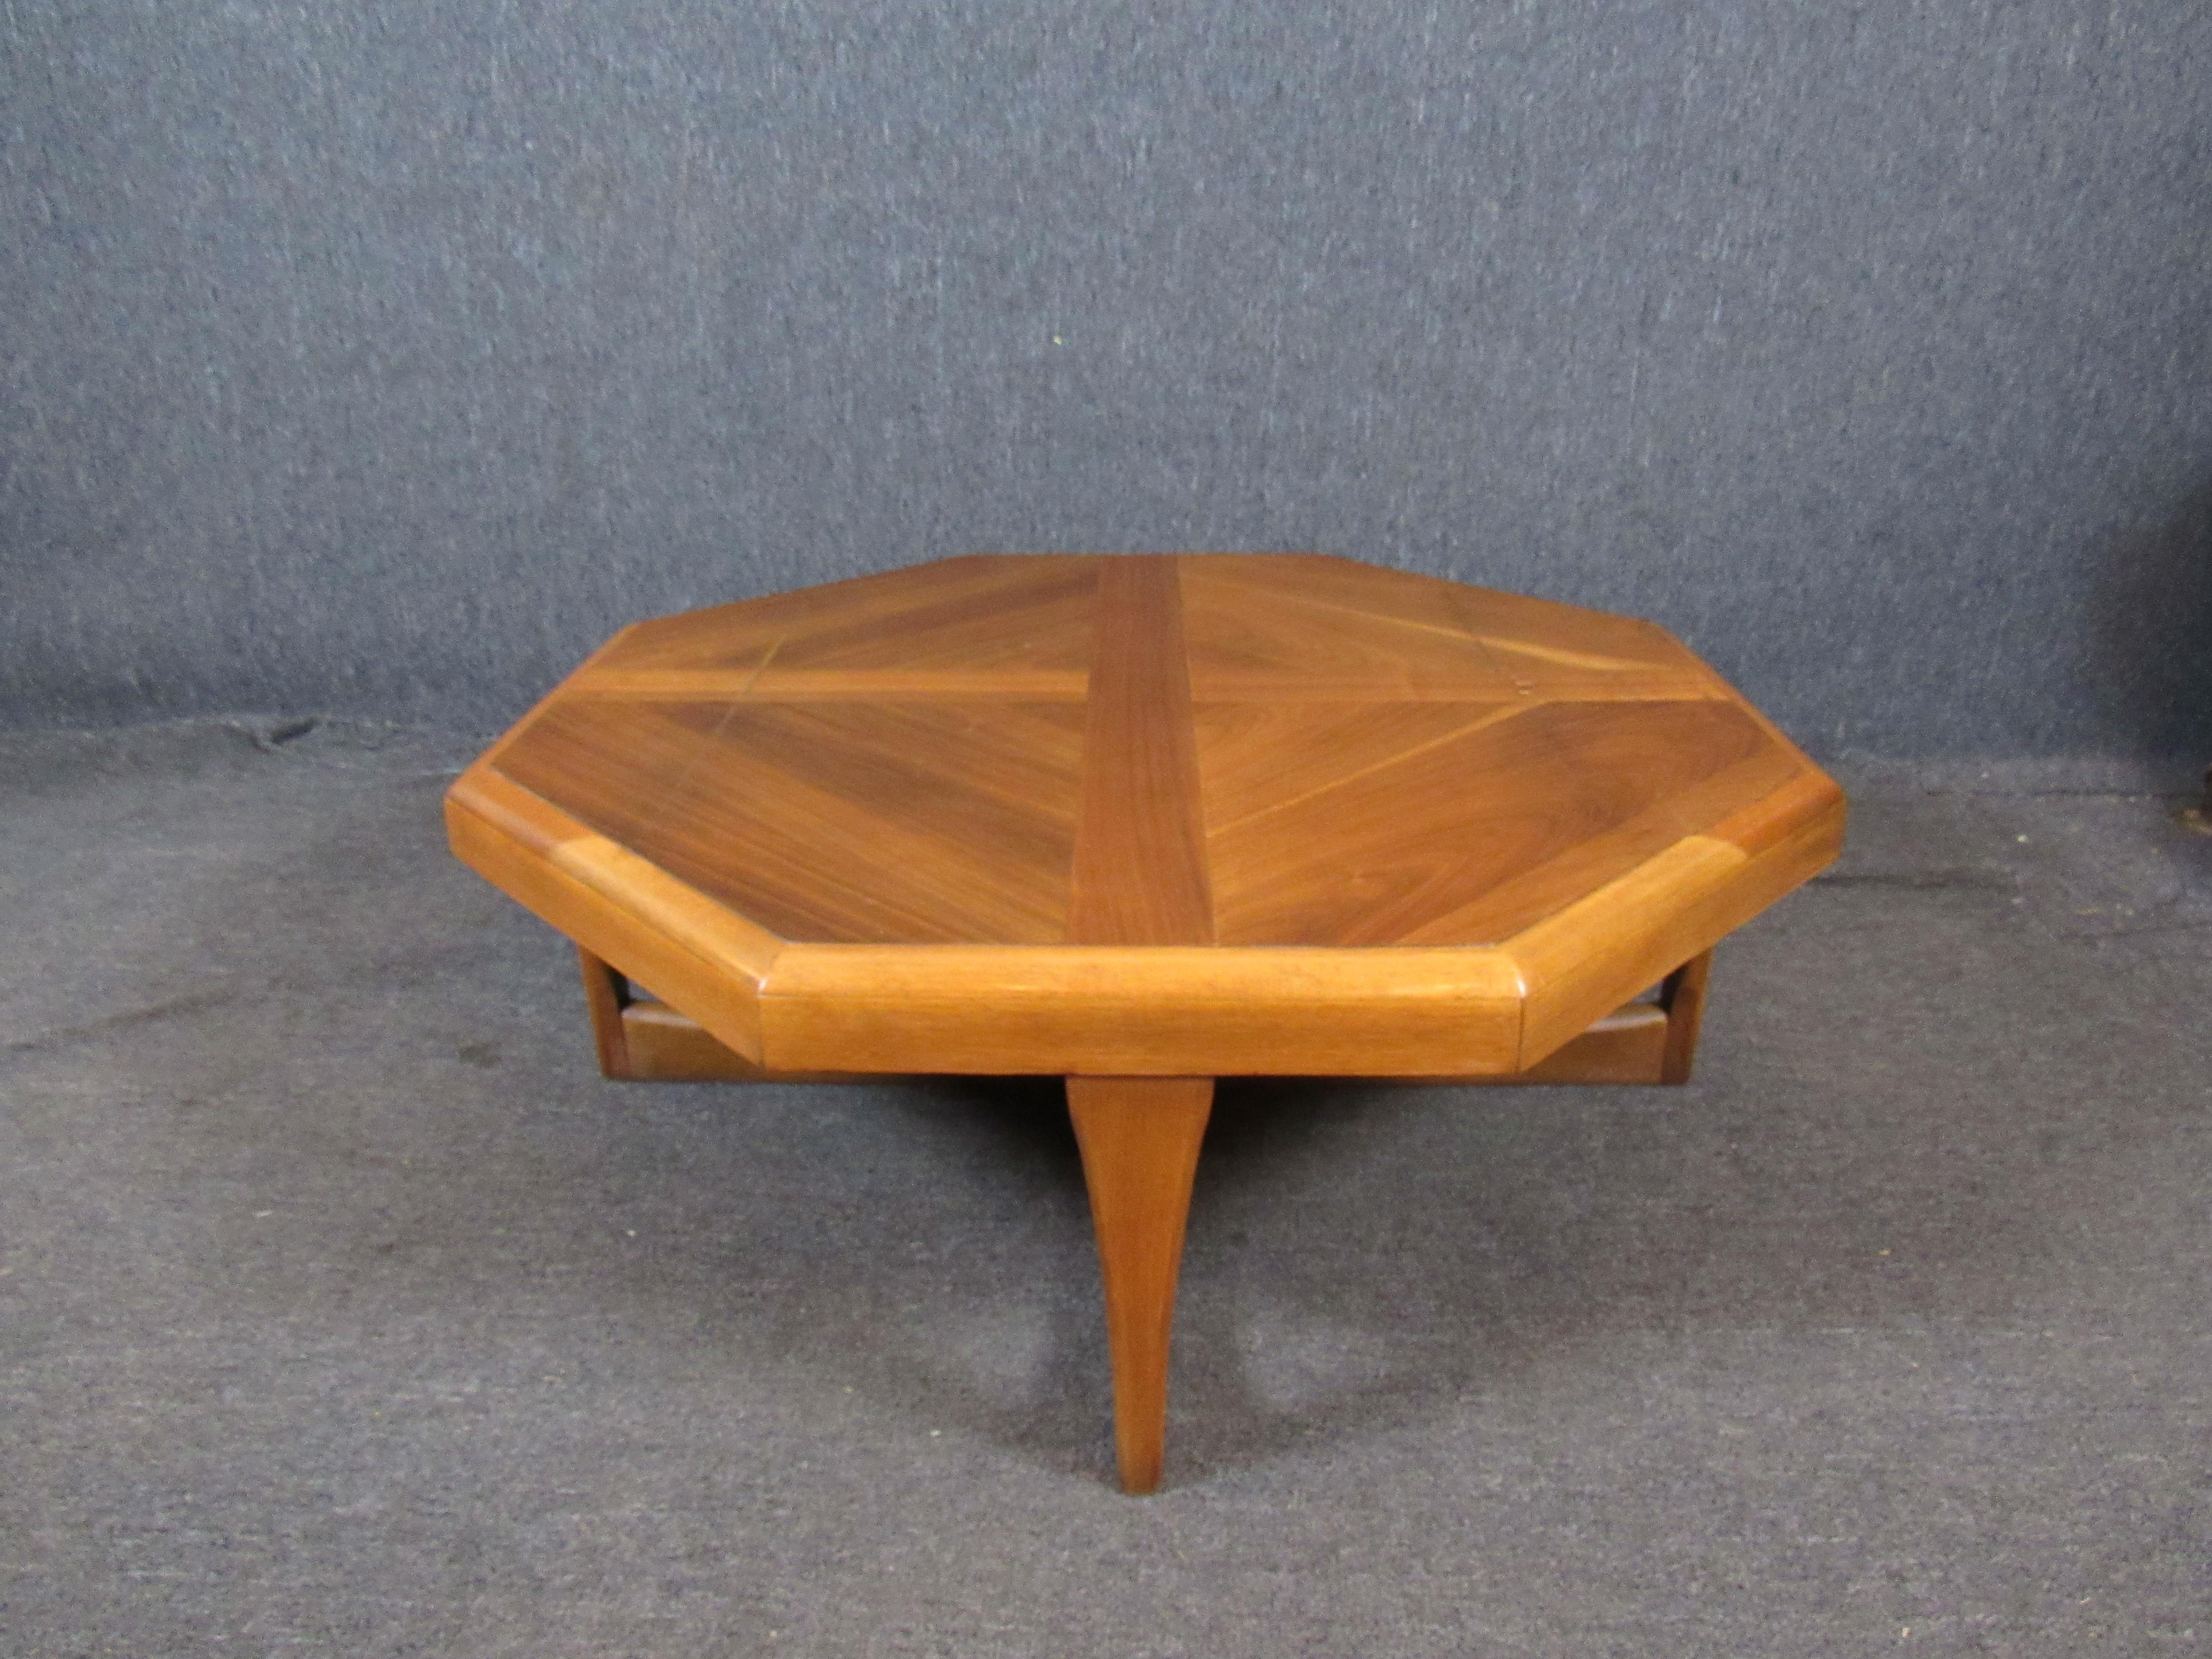 This coffee table is sure to make people stop and stare! A large octagonal table top features contrasting veneers that show off an exceptional natural grain. Crossed sled legs help lend unparalleled stability. A classic mid-century design from the